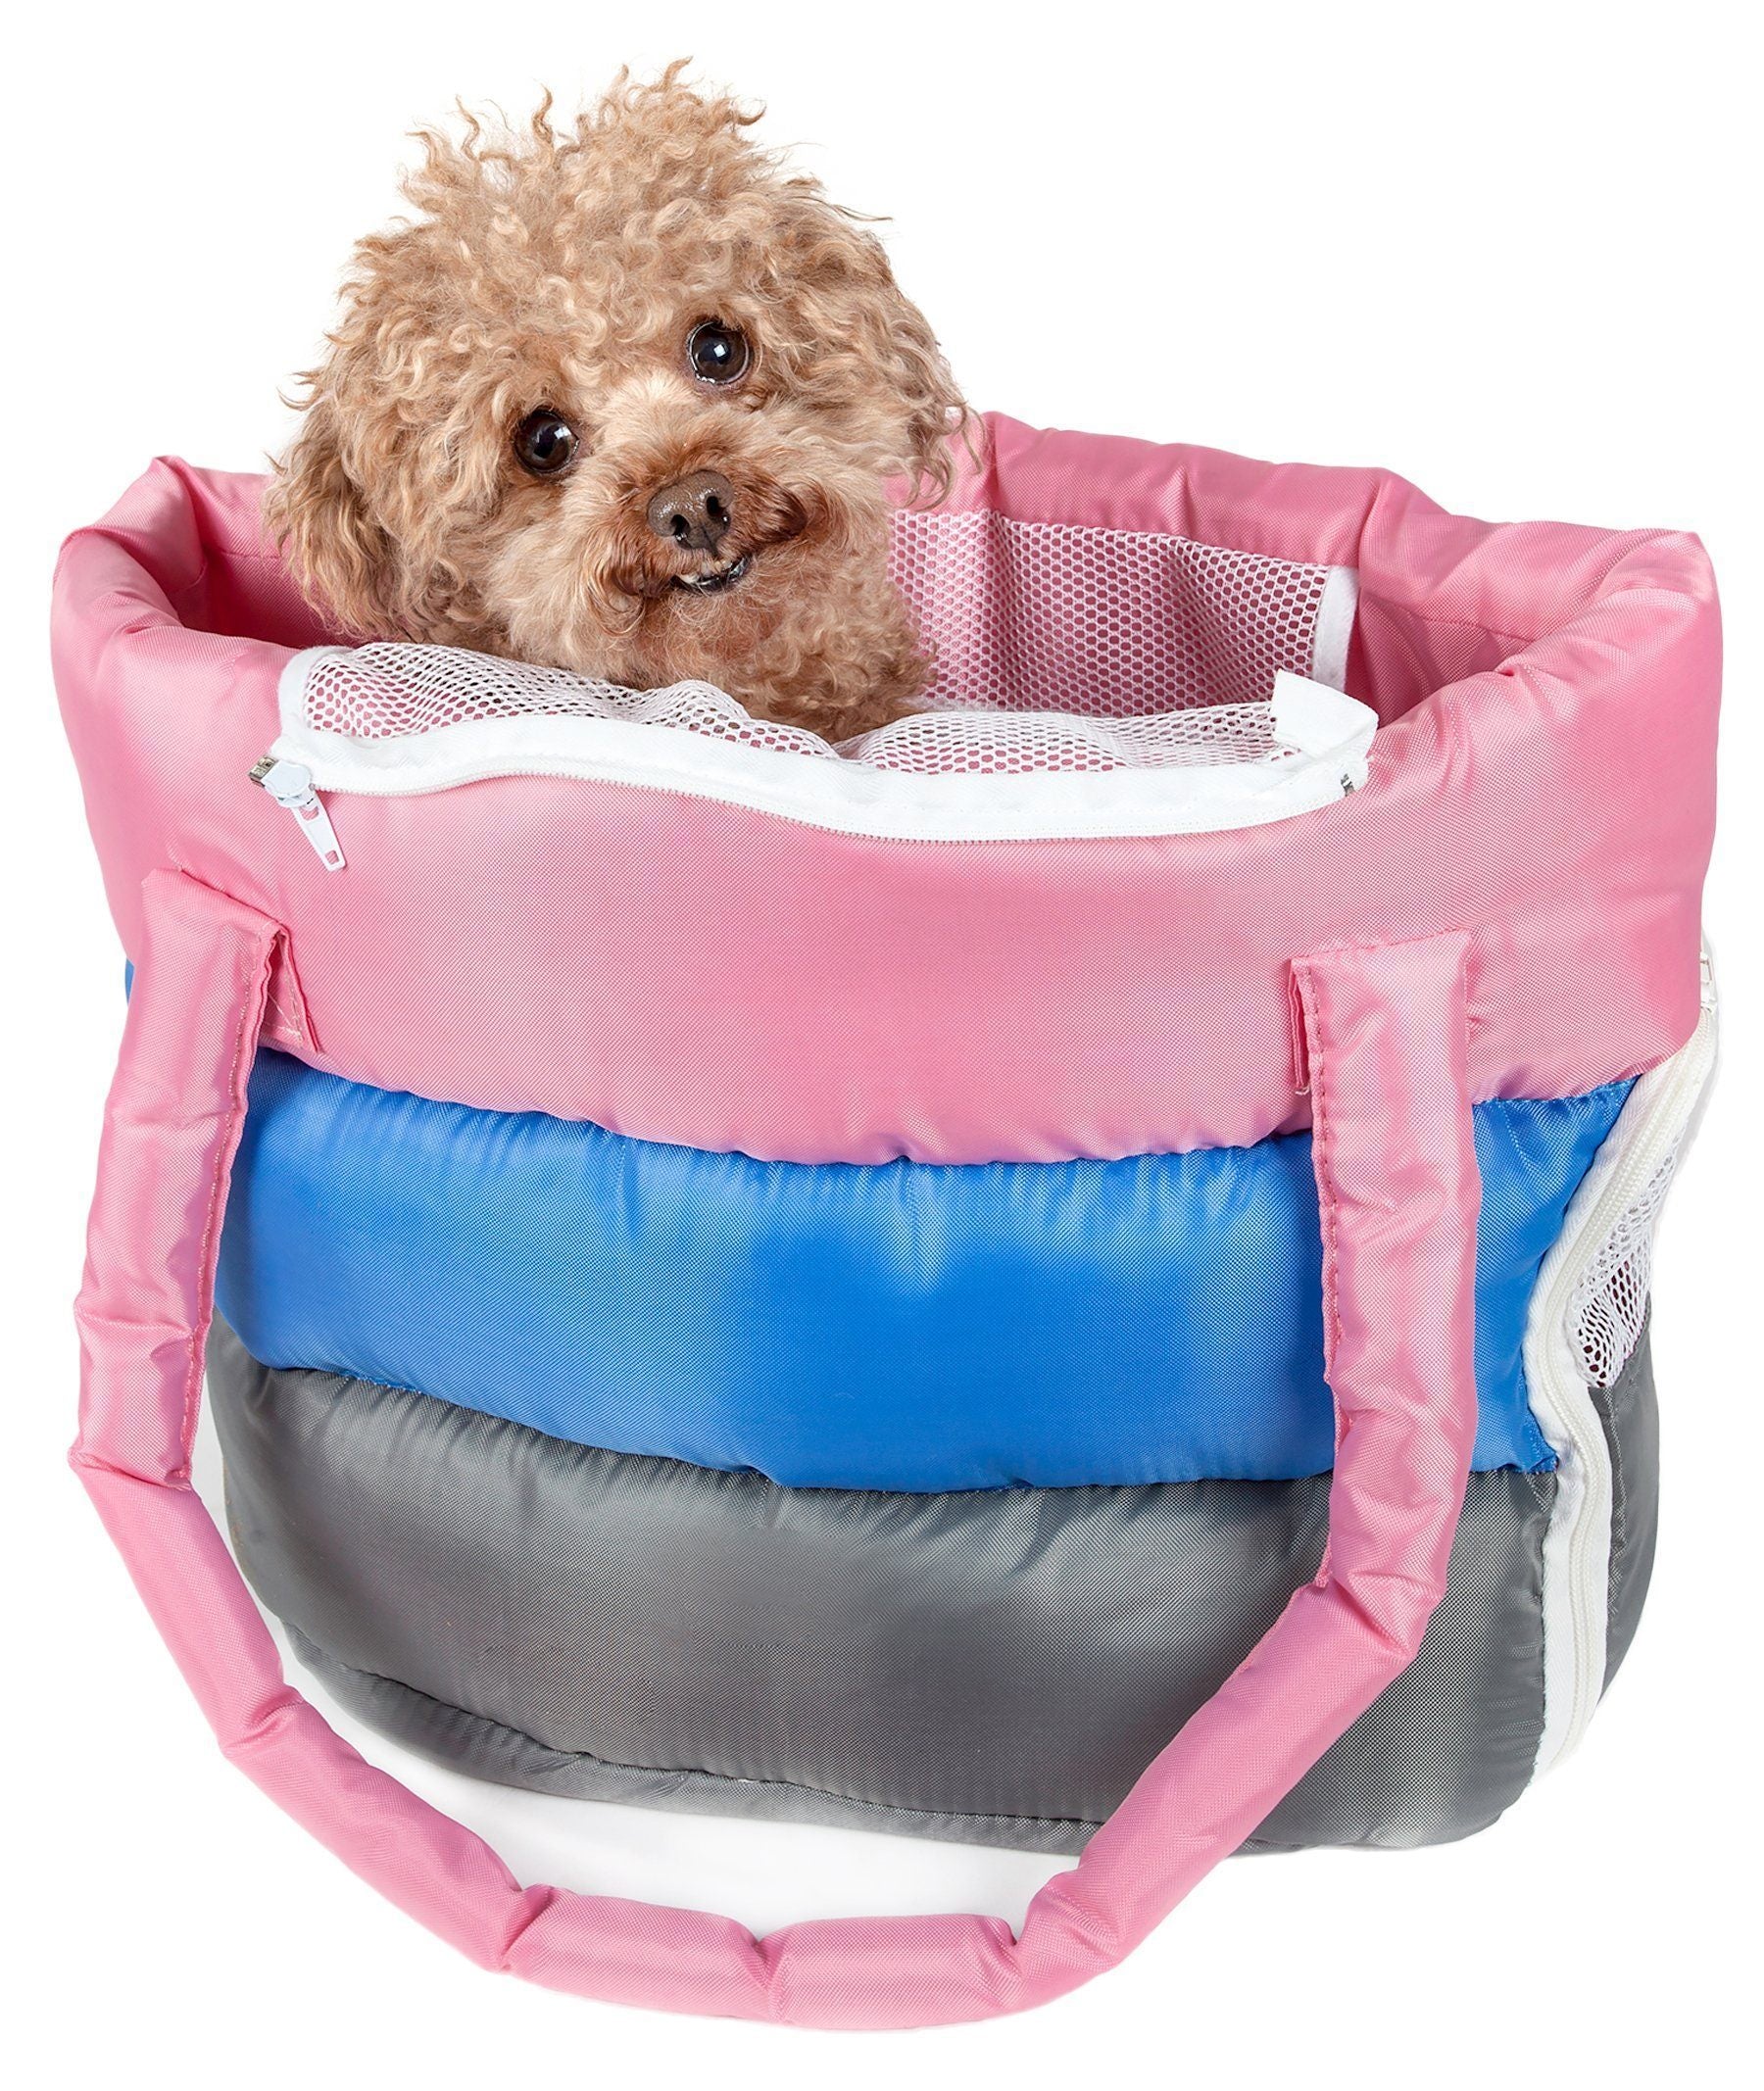 Pet Life ® 'Bubble-Poly' Tri-Colored Winter Insulated Fashion Designer Pet Dog Carrier Pink, Blue, Grey 